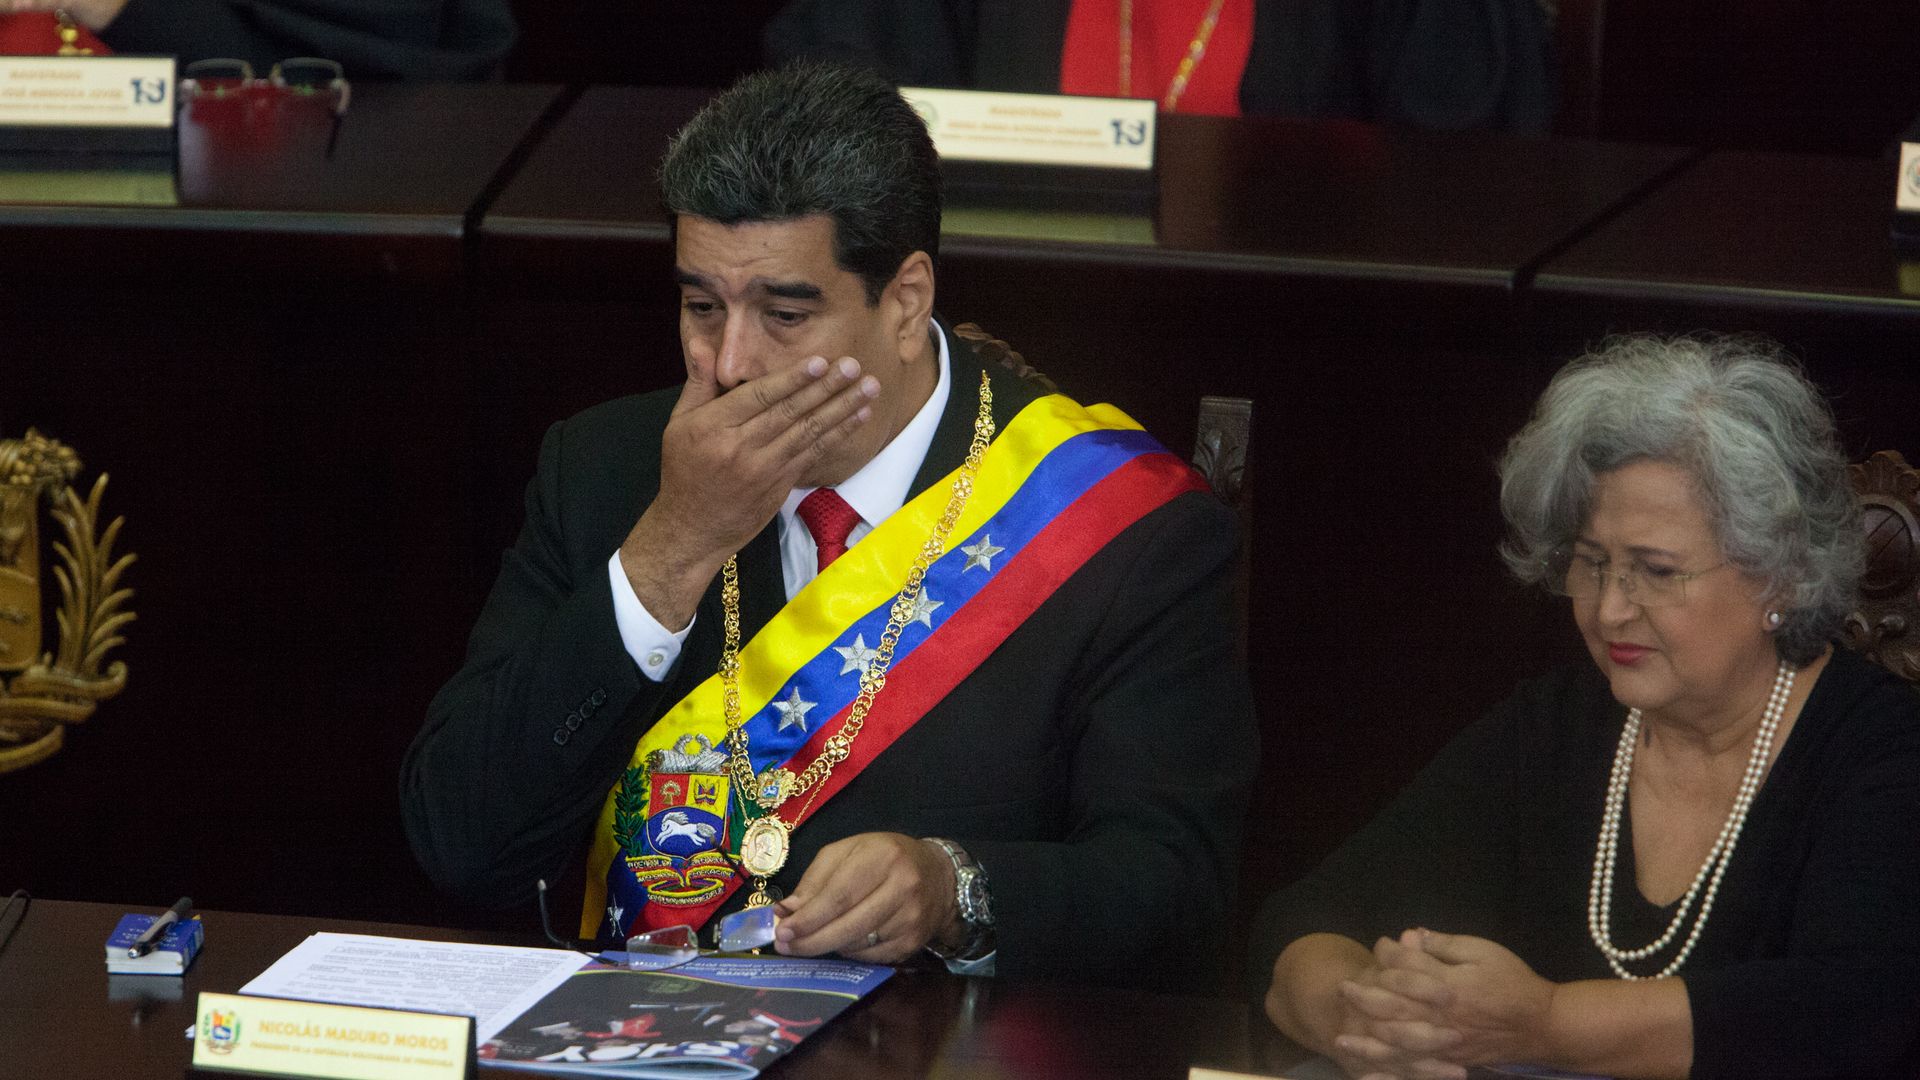 Nicolas Maduro covers his mouth and looks shocked.